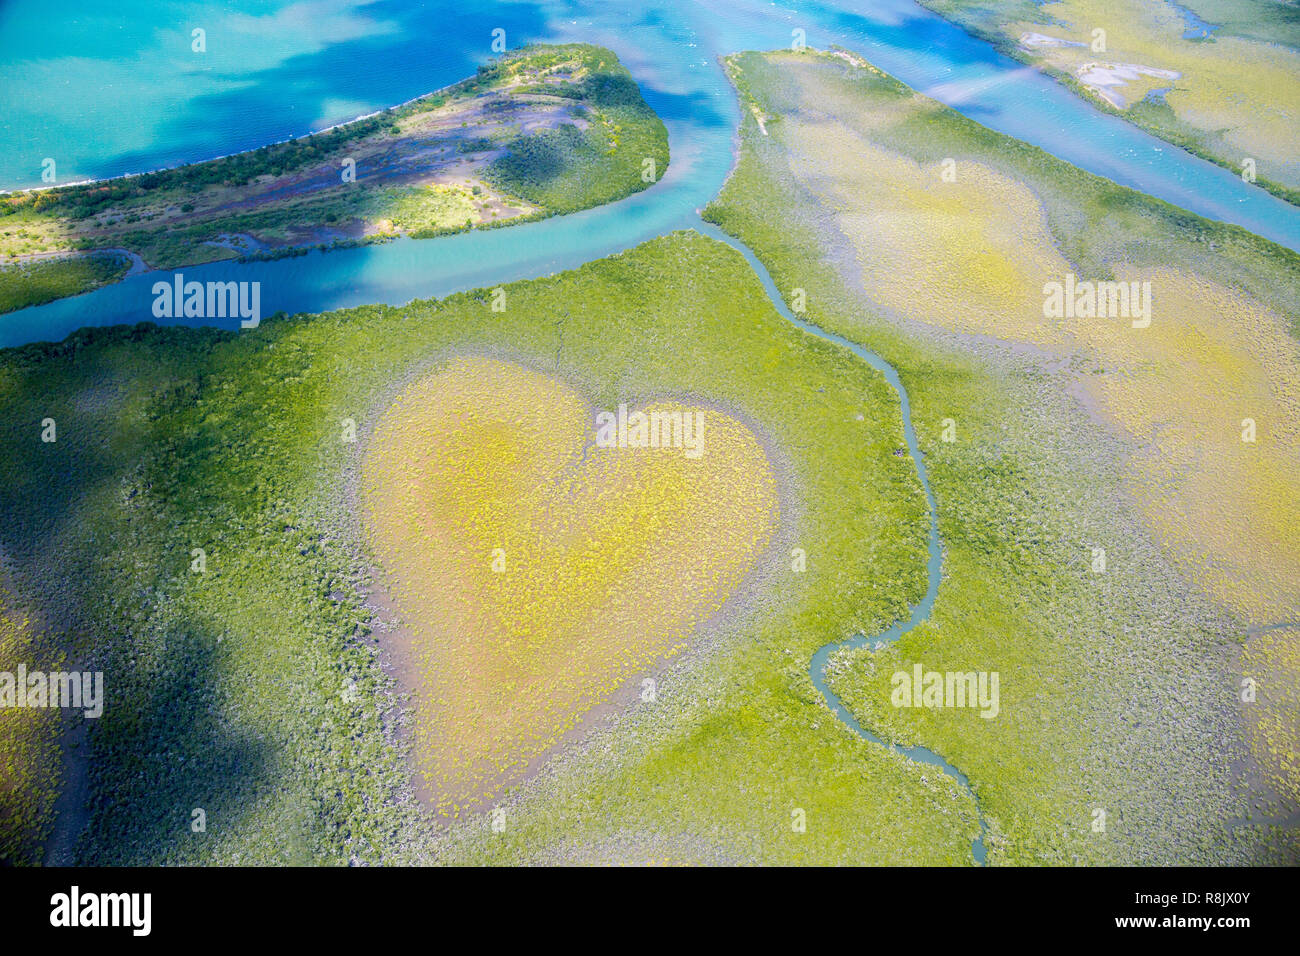 Heart of Voh, aerial view, formation of mangroves vegetation resembles a heart seen from above, New Caledonia, Micronesia, South Pacific Ocean. Heart of Earth. Earth day. Love life, save environment. Stock Photo